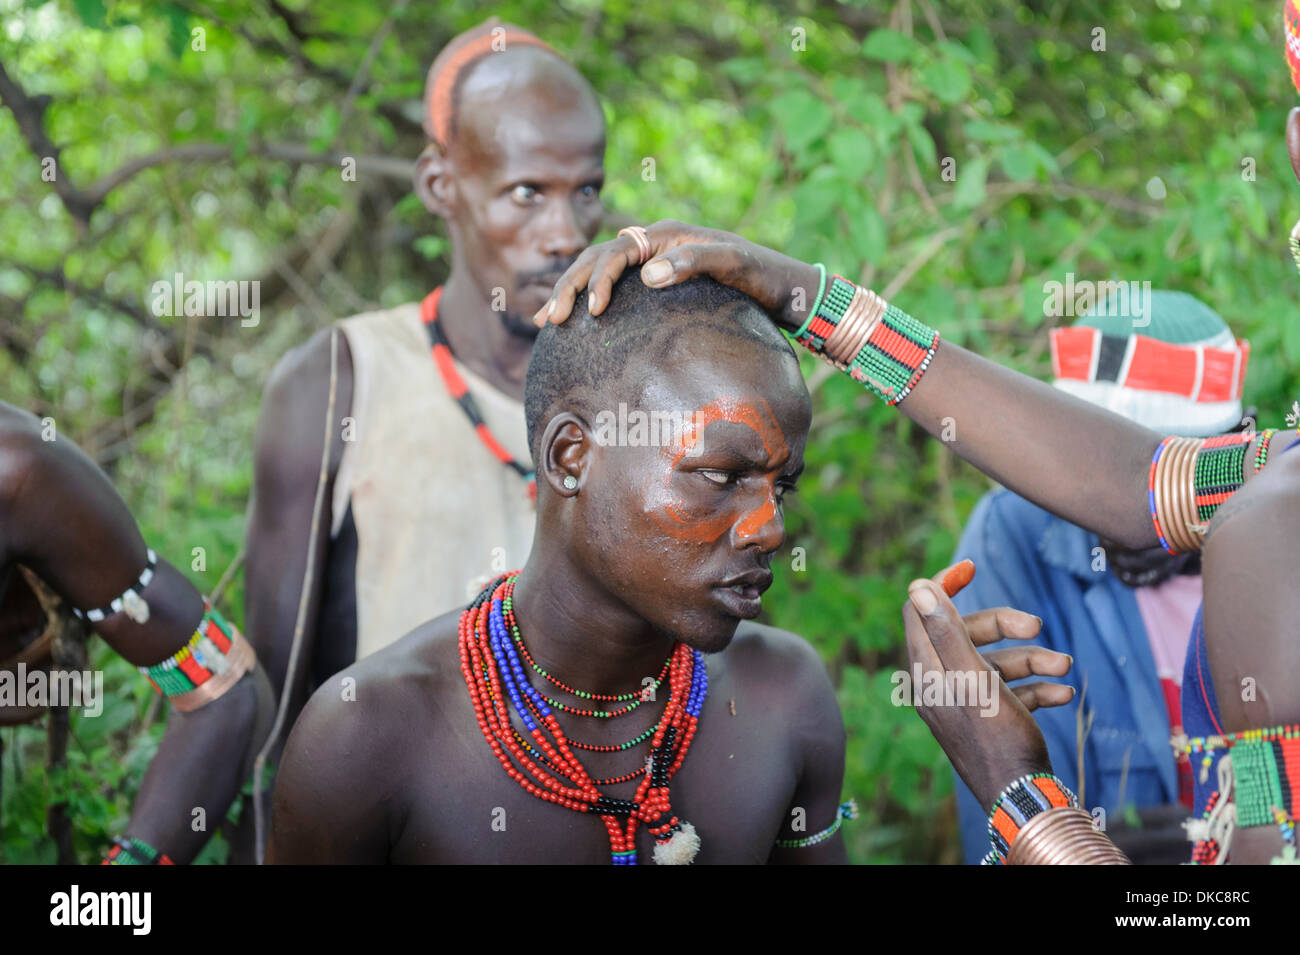 Maza getting ready to participate in the bull jumping ceremony, Omo valley, Ethiopia Stock Photo